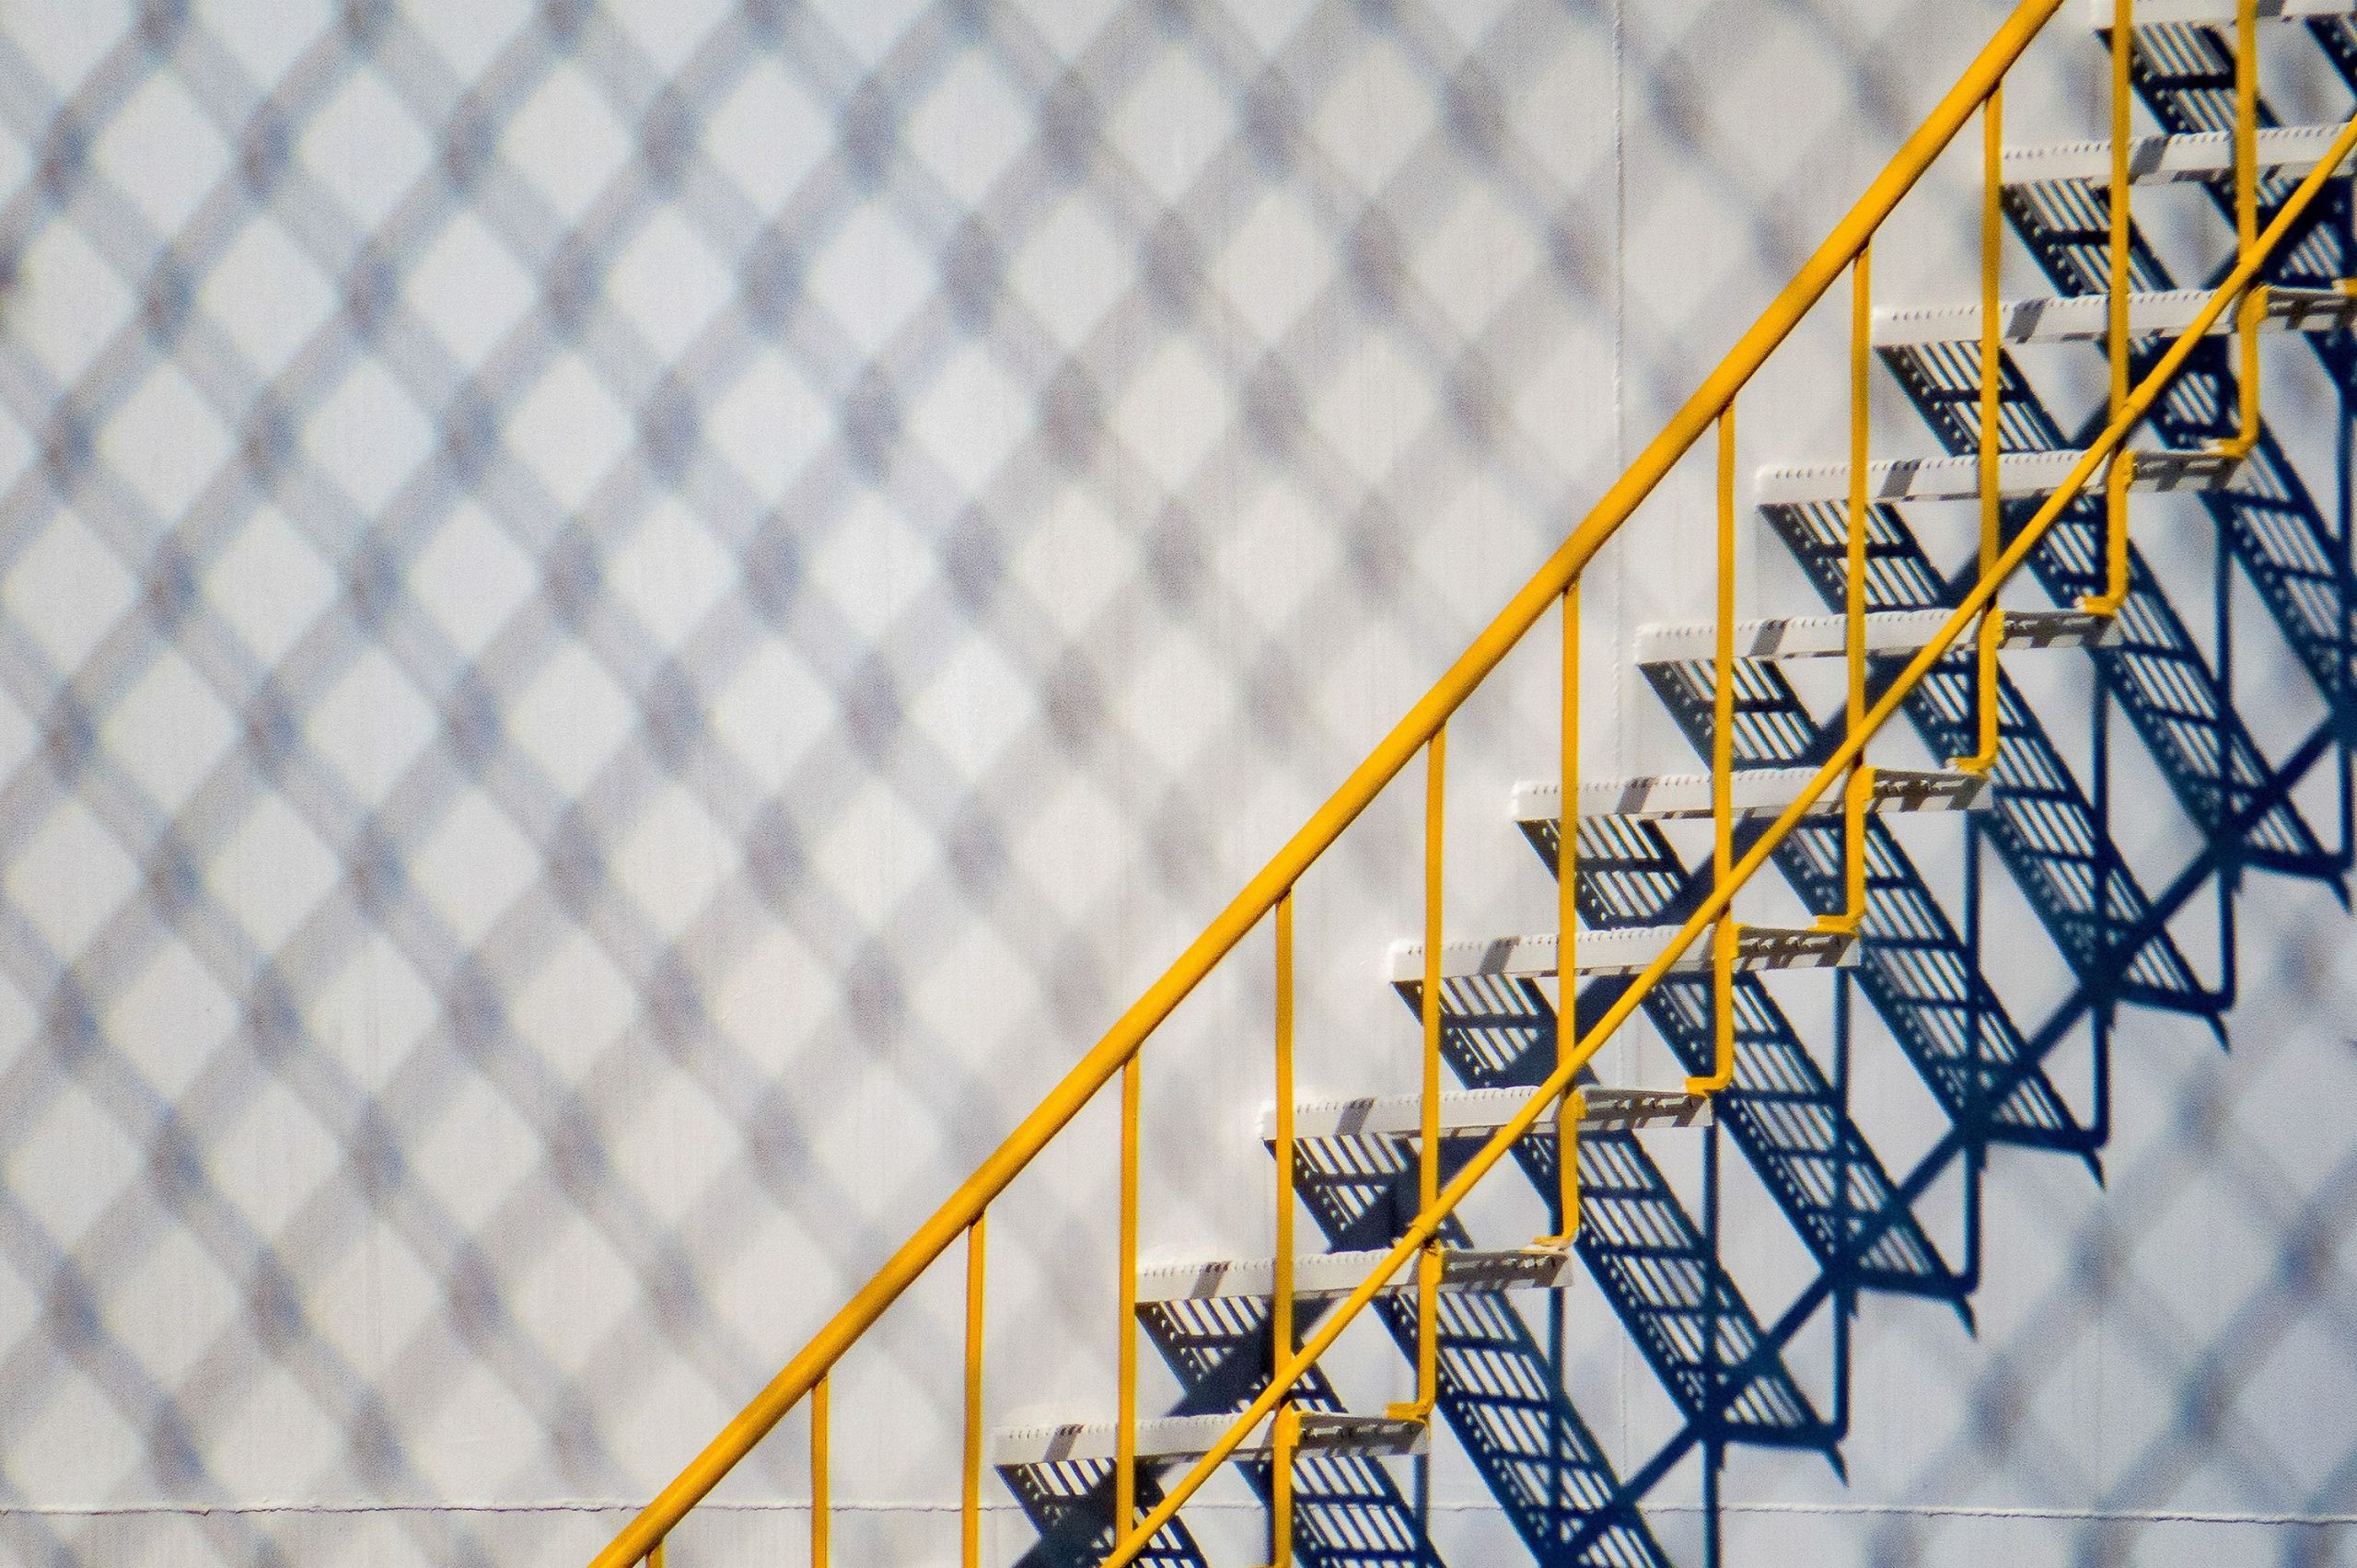 Metal staircase and yellow handrail against a white wall. covered by shadow of chain link fence